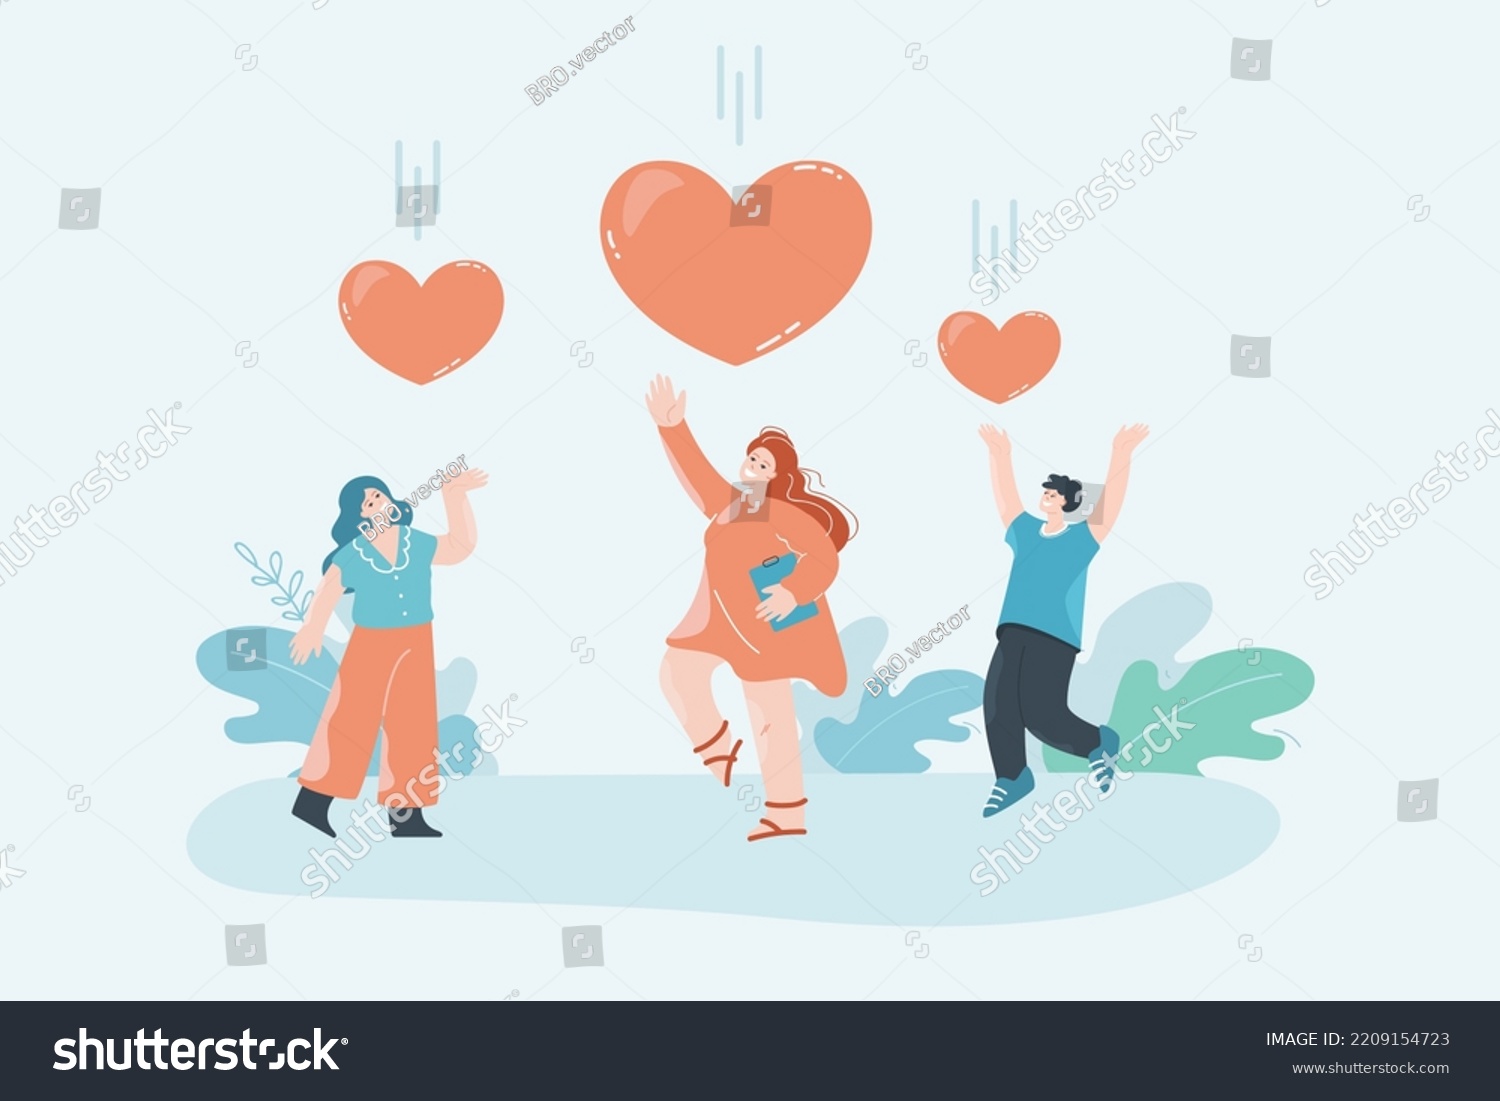 People Catching Hearts Falling Sky Flat Stock Vector (Royalty Free ...